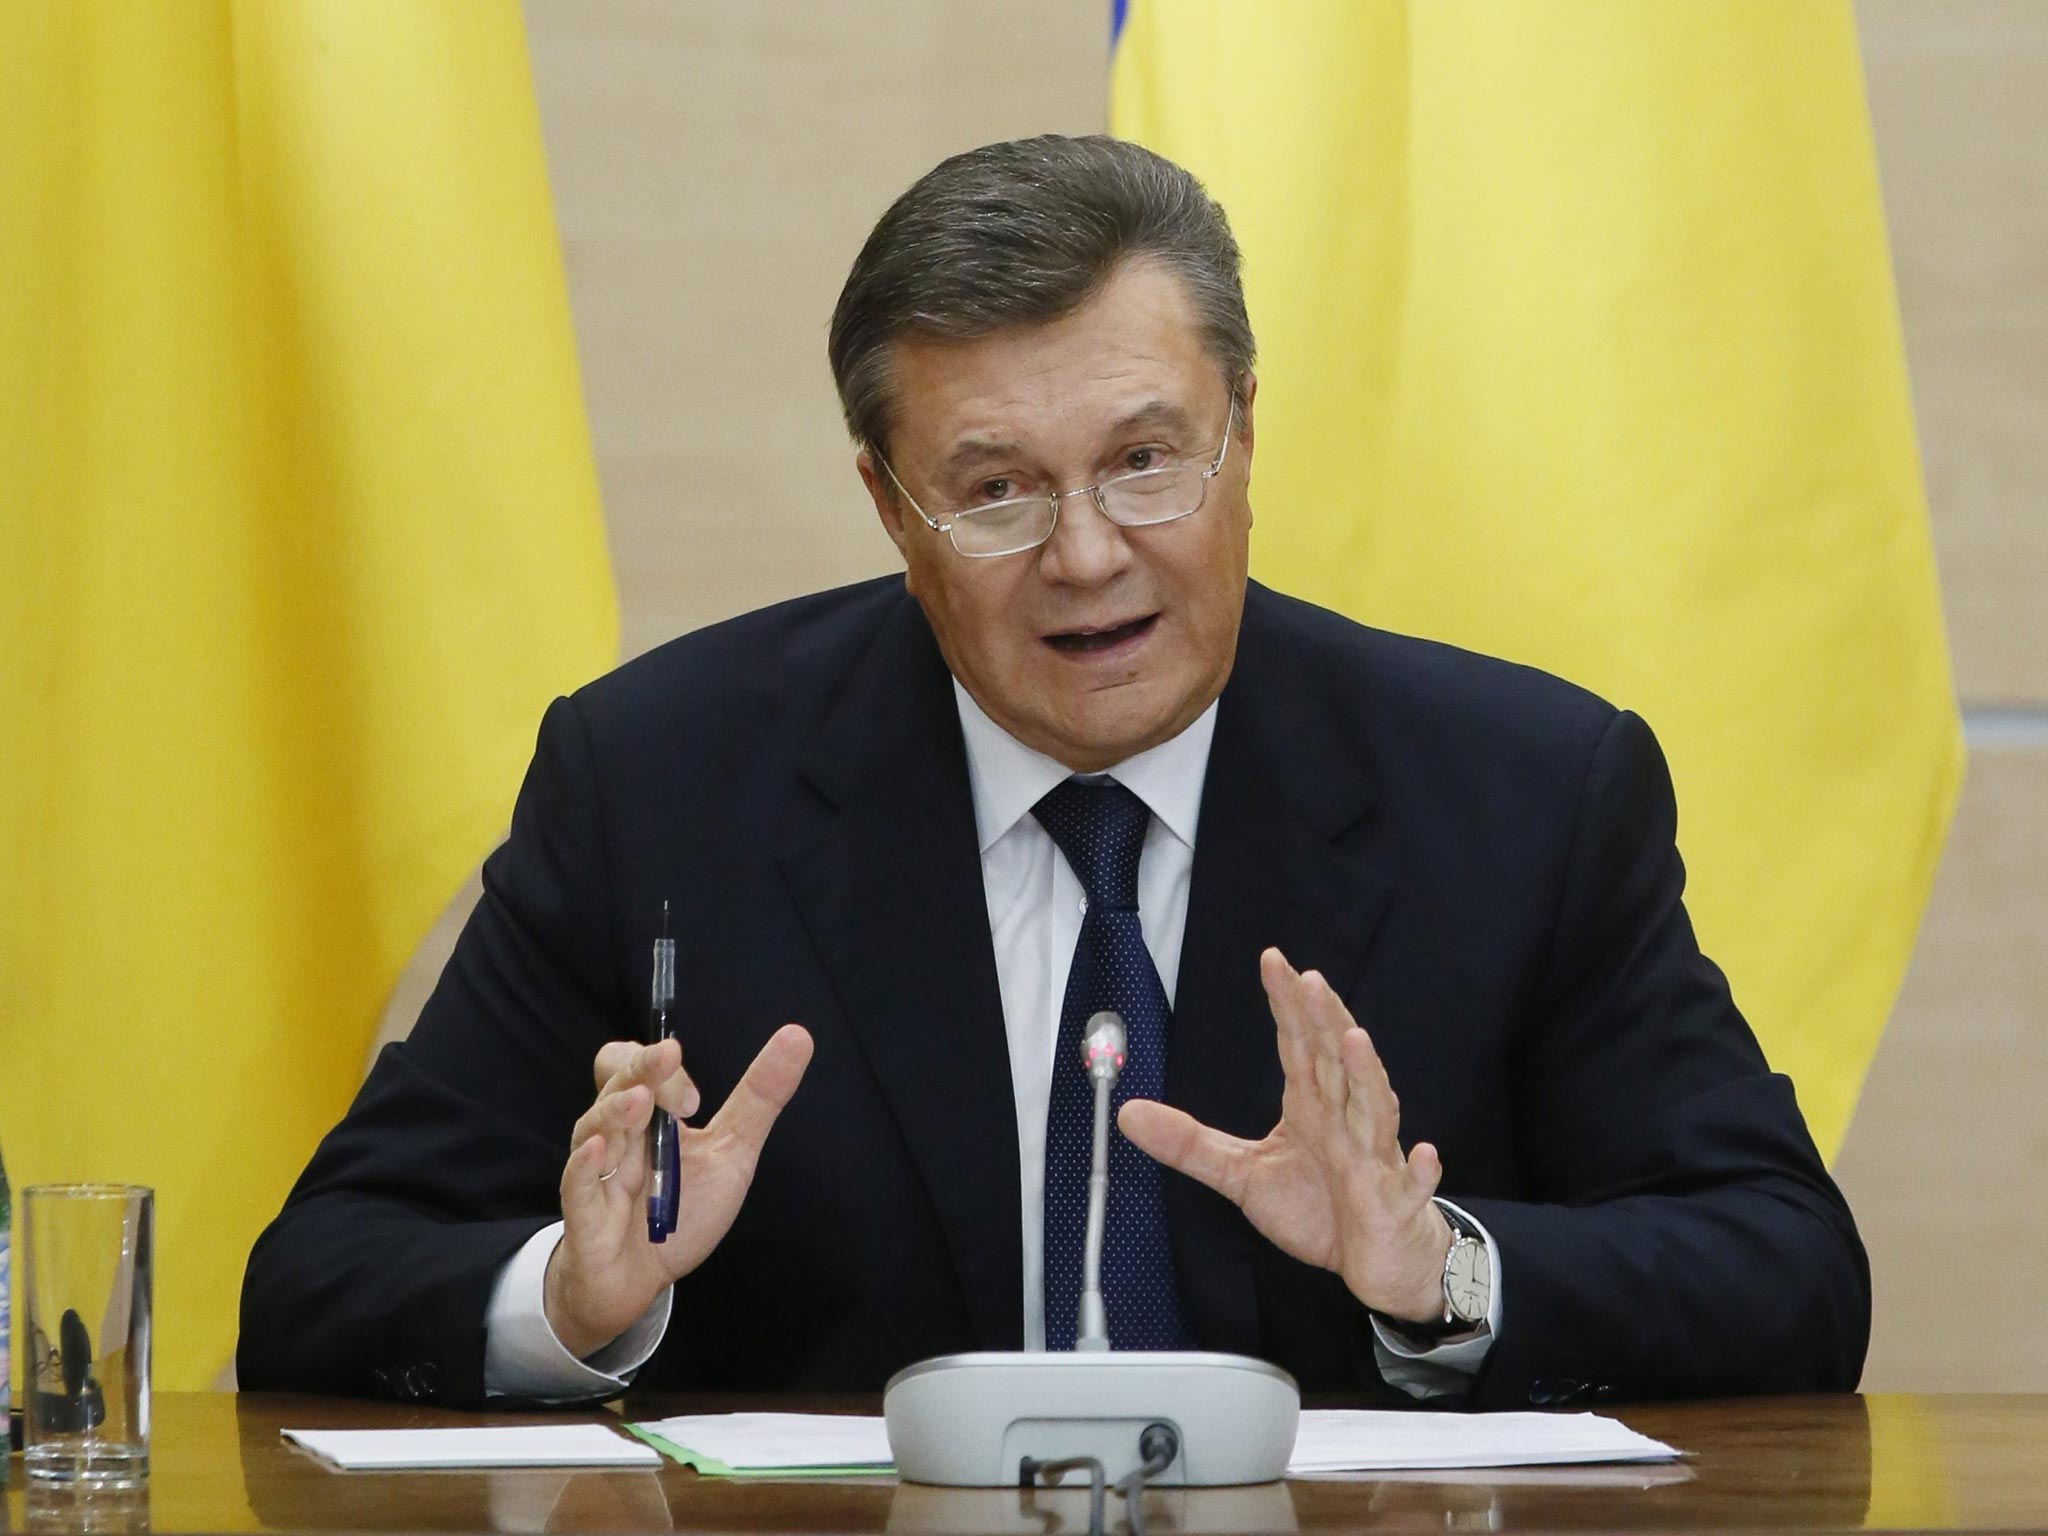 The former Ukrainian President says he was forced to flee the country by ‘pro-fascist gangsters’